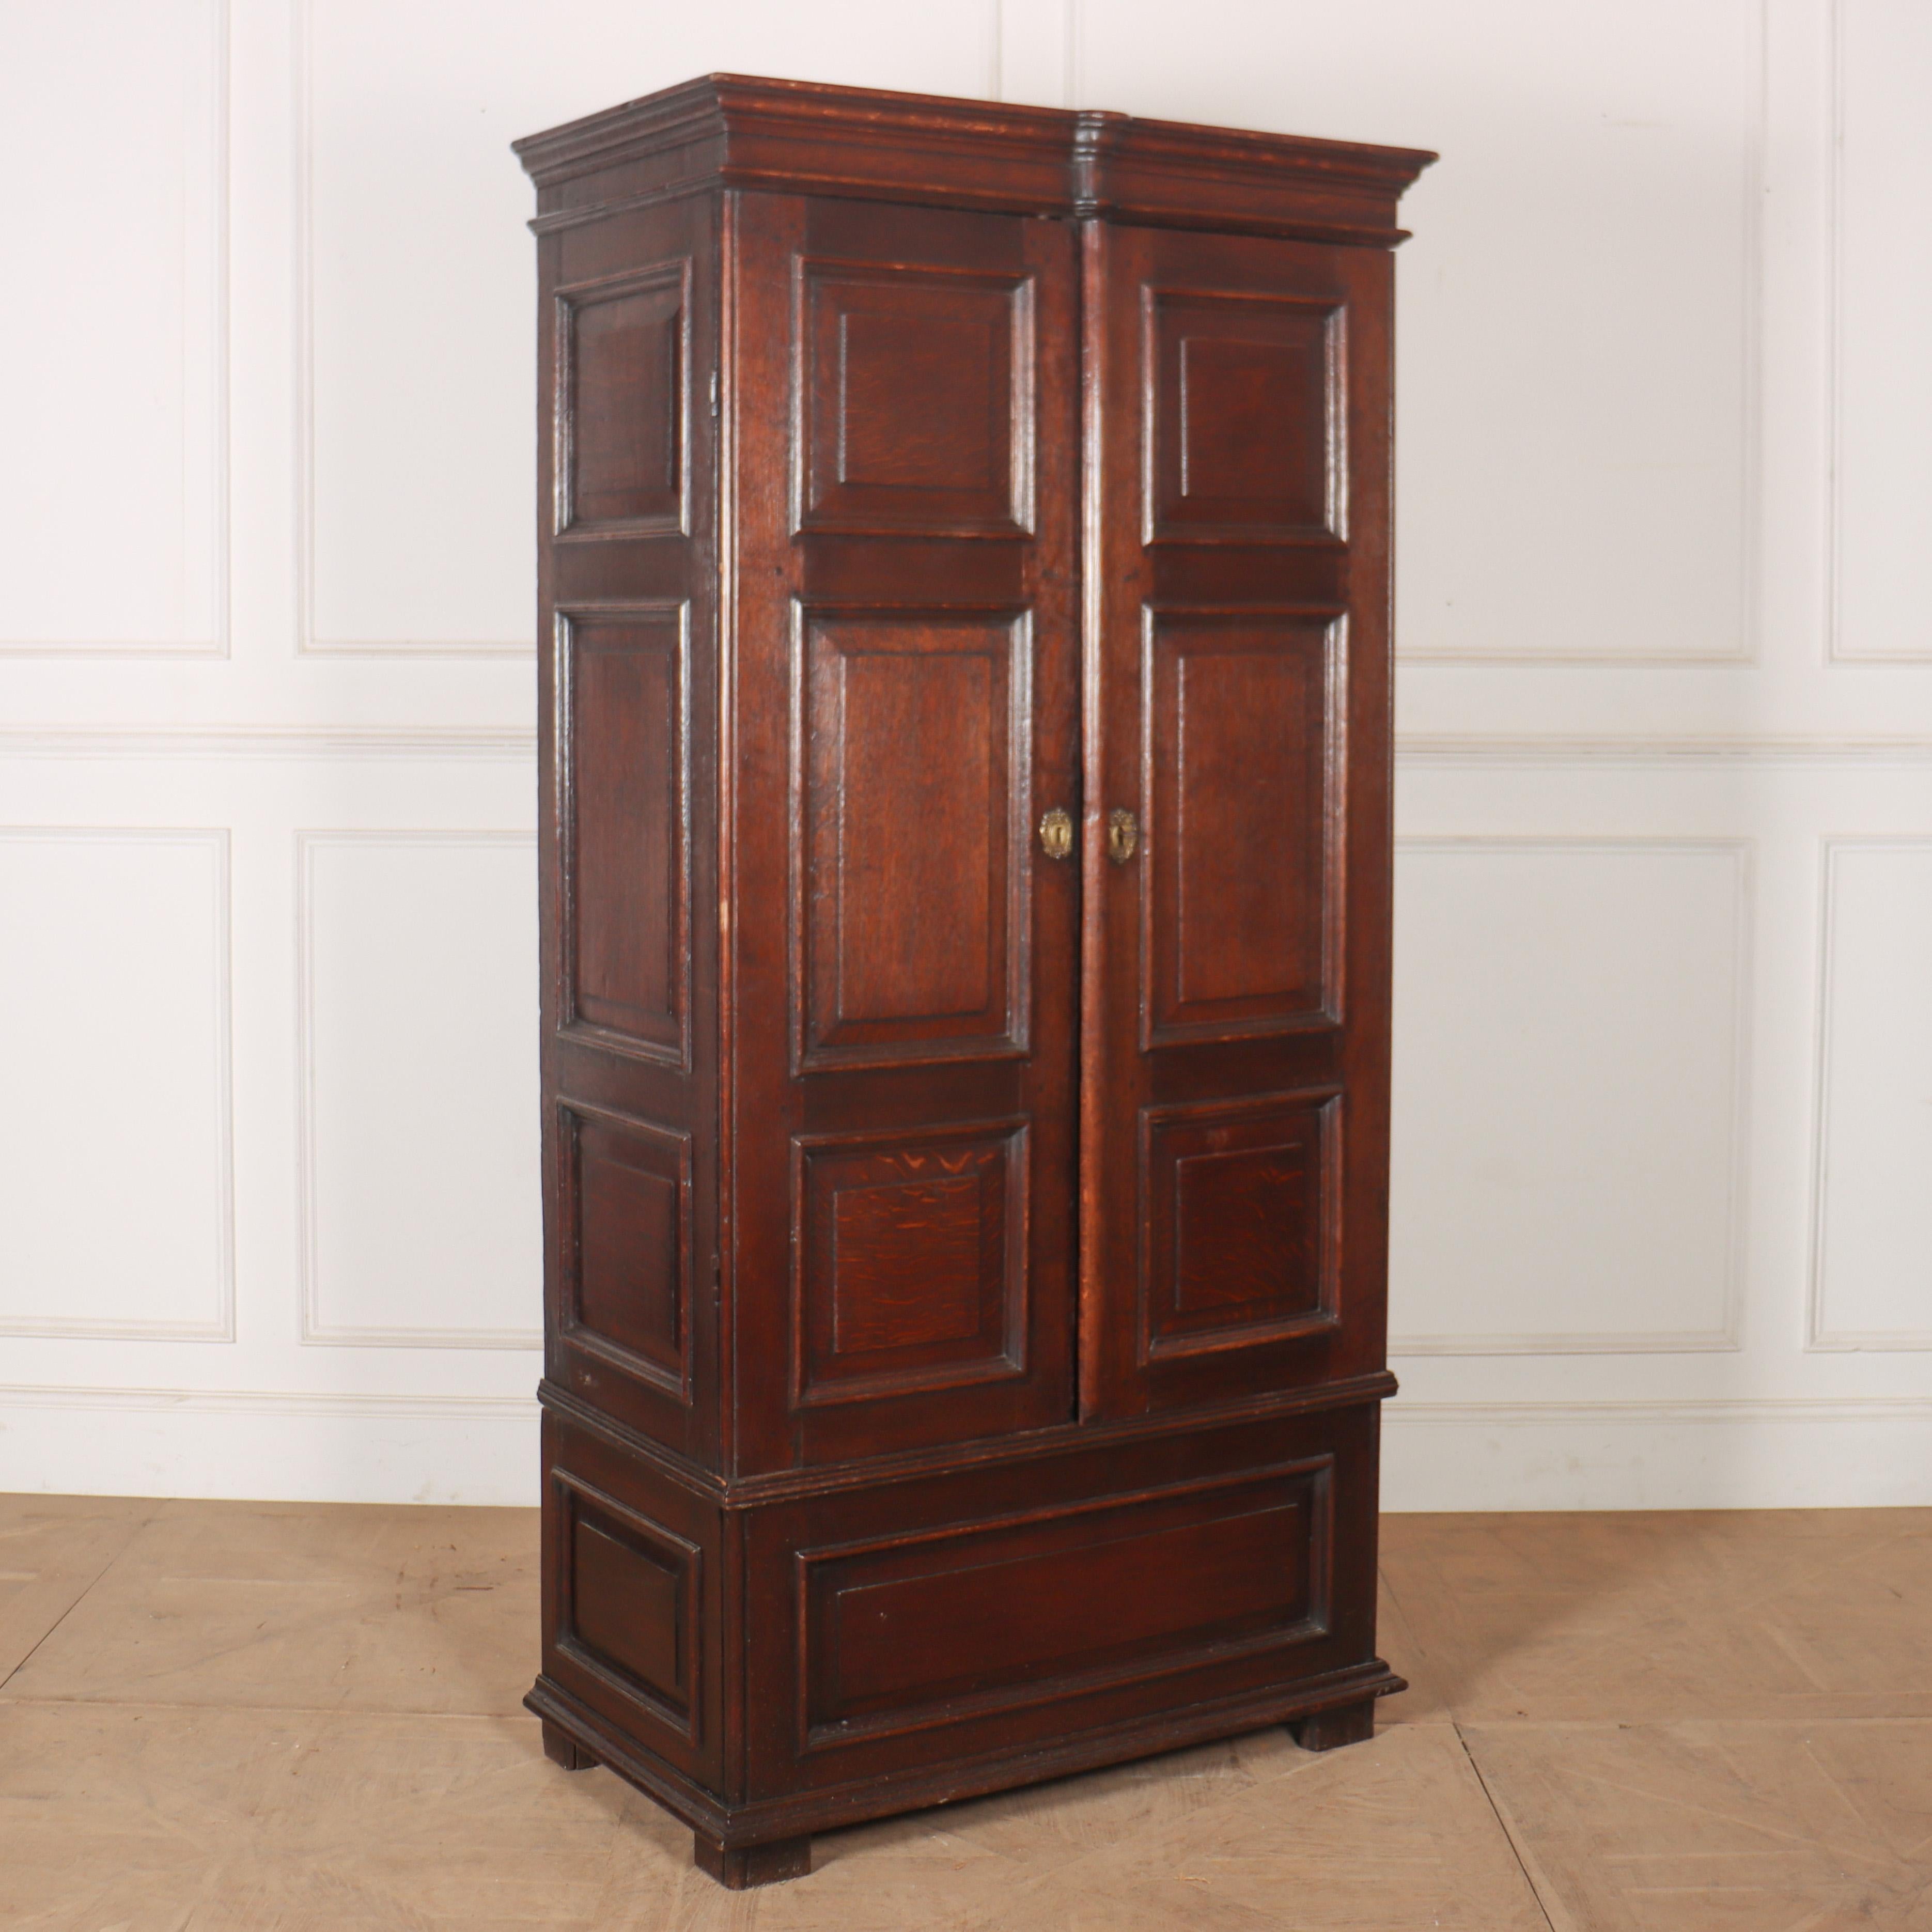 Narrow 18th C English oak hall cupboard. Very good colour. 1780.

Reference: 8181

Dimensions
38 inches (97 cms) Wide
20 inches (51 cms) Deep
75 inches (191 cms) High